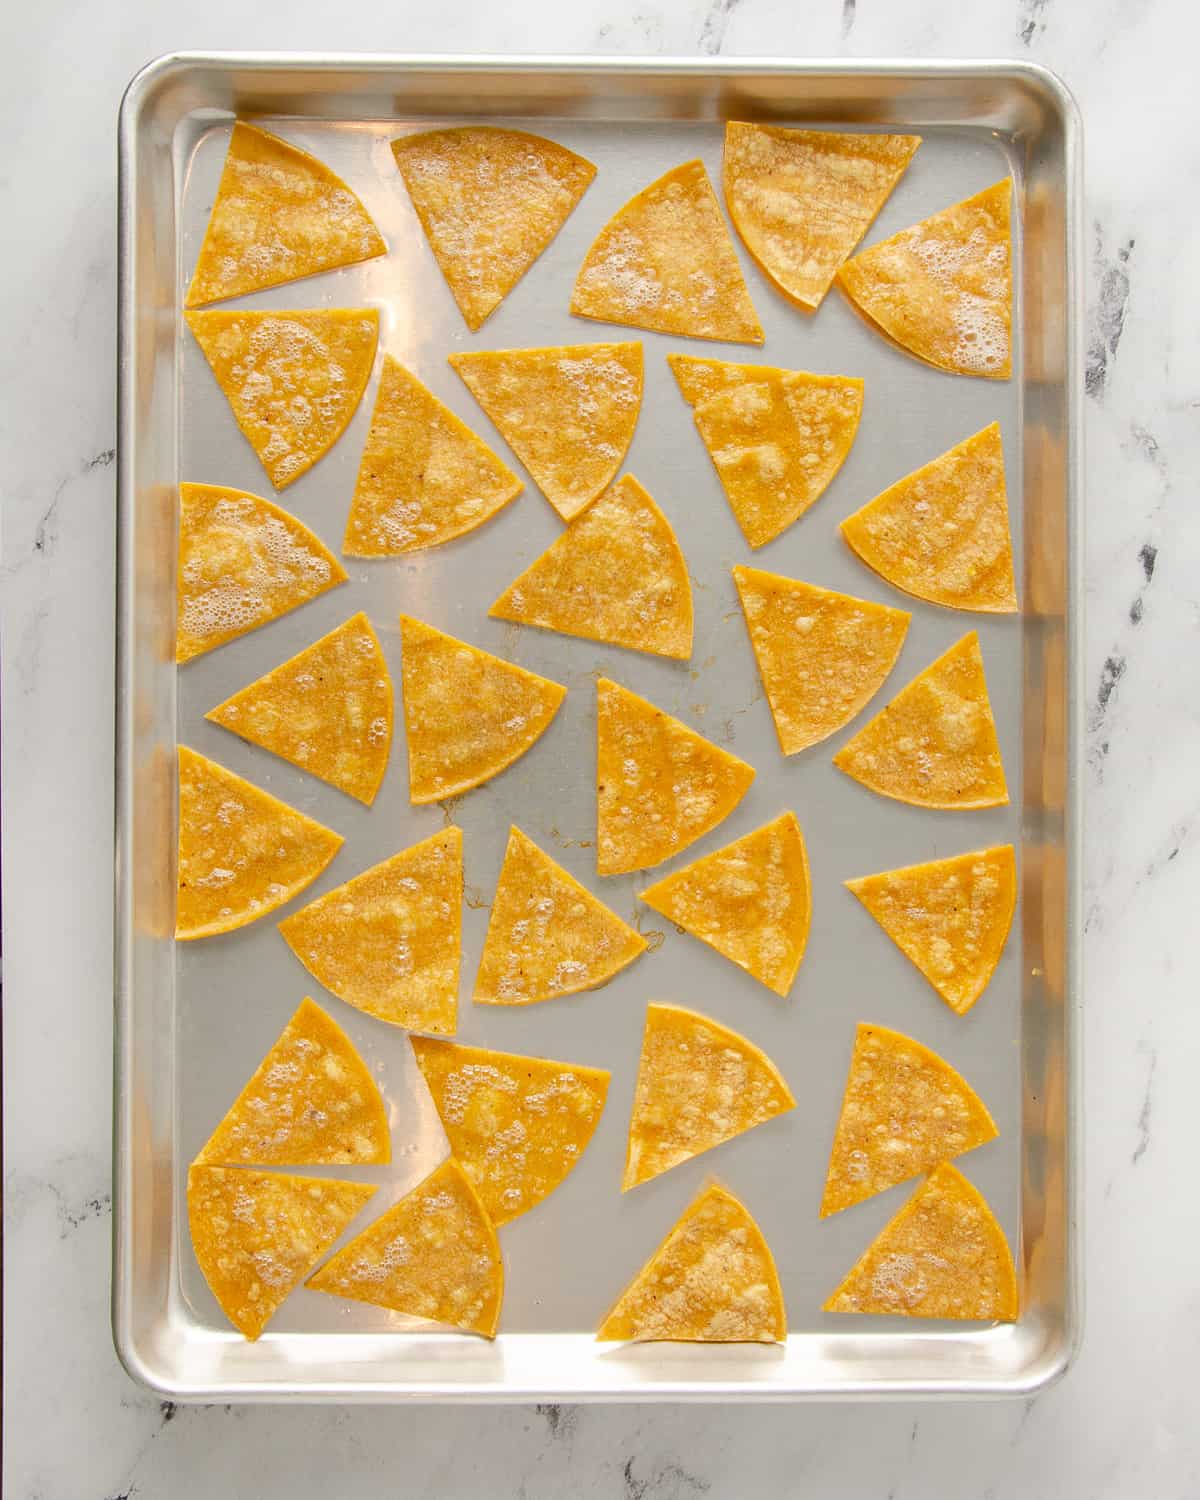 Corn tortilla pieces on a baking tray after being baked on one side and before being flipped.